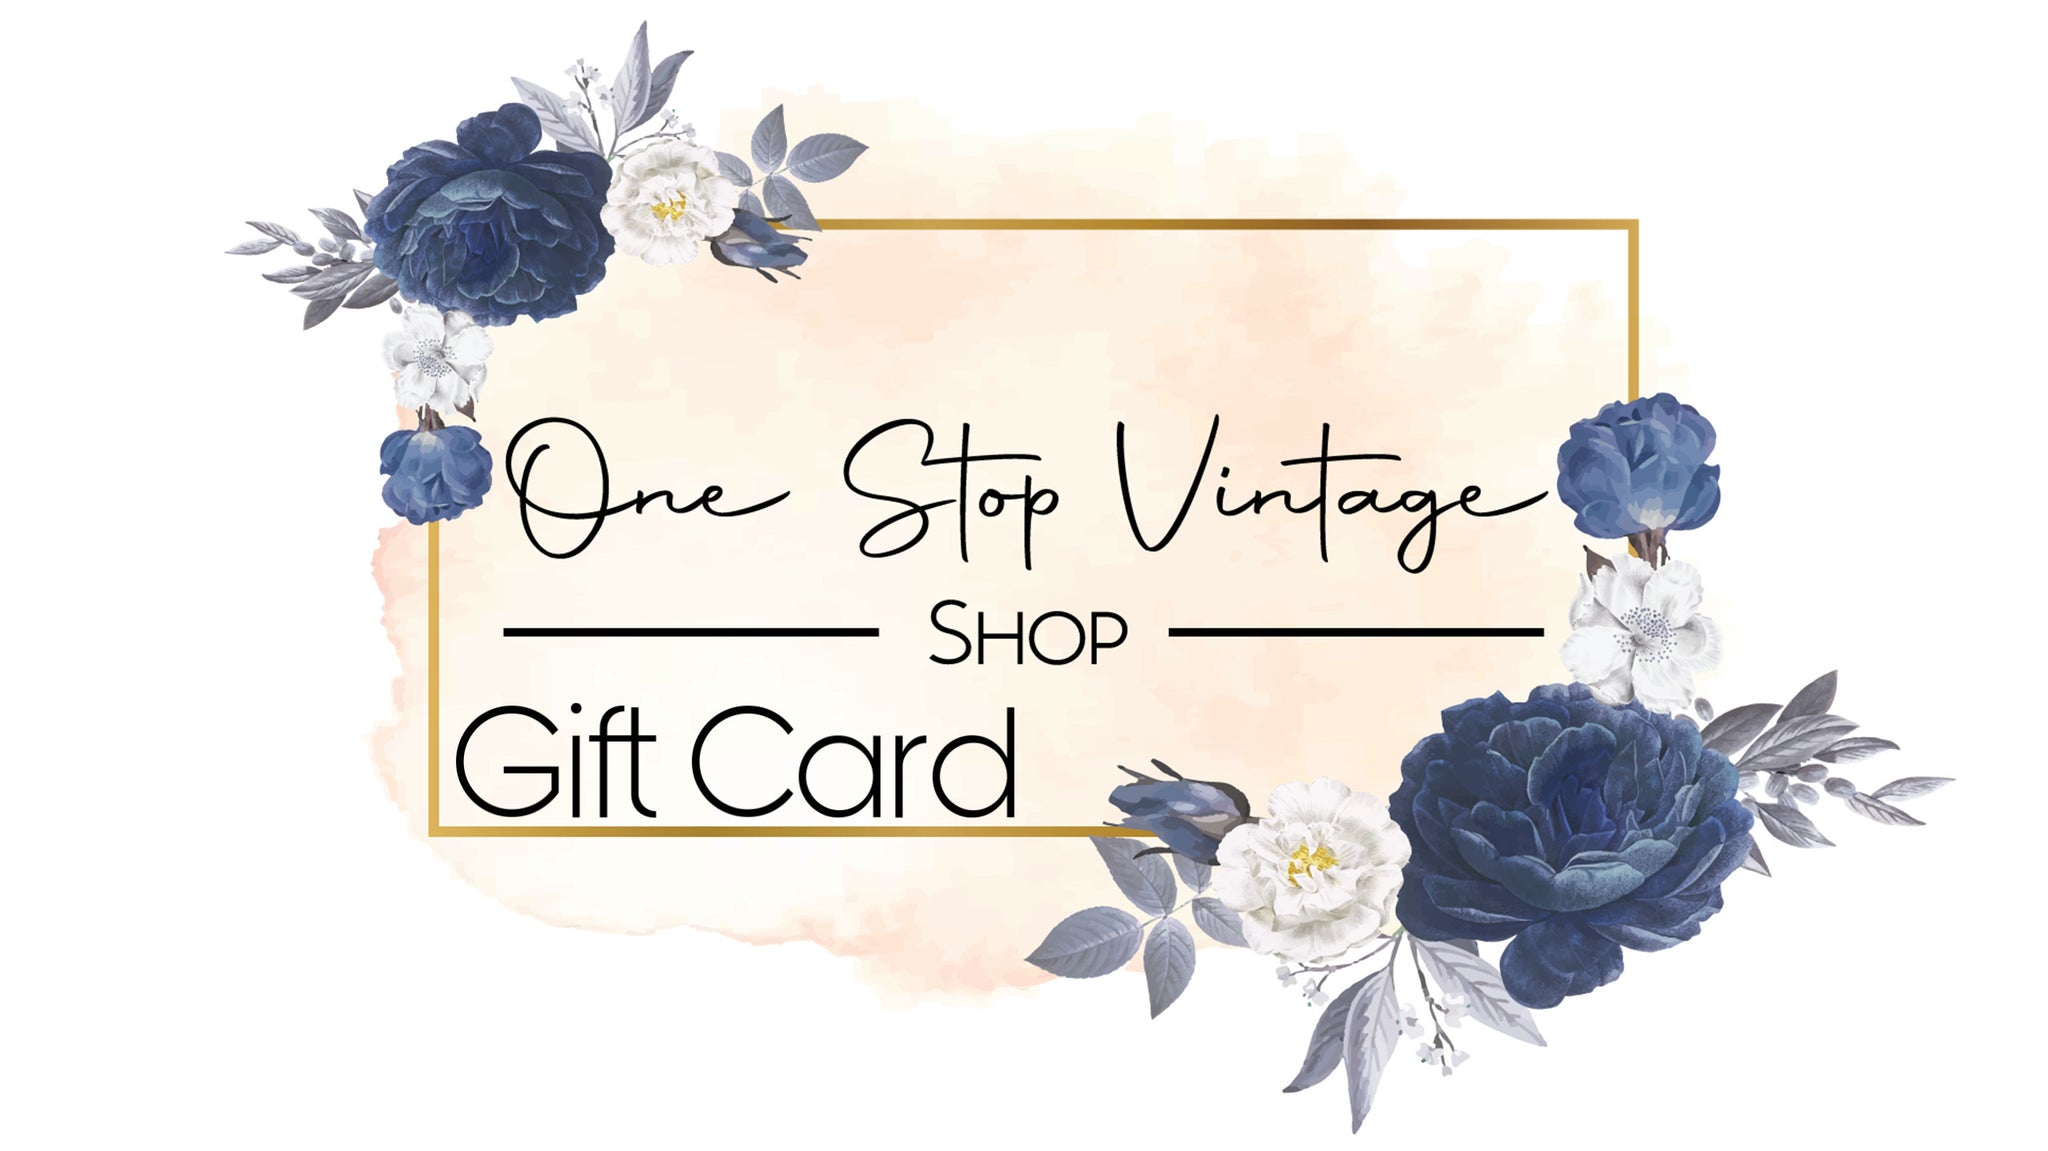 One Stop Vintage Shop Gift Card